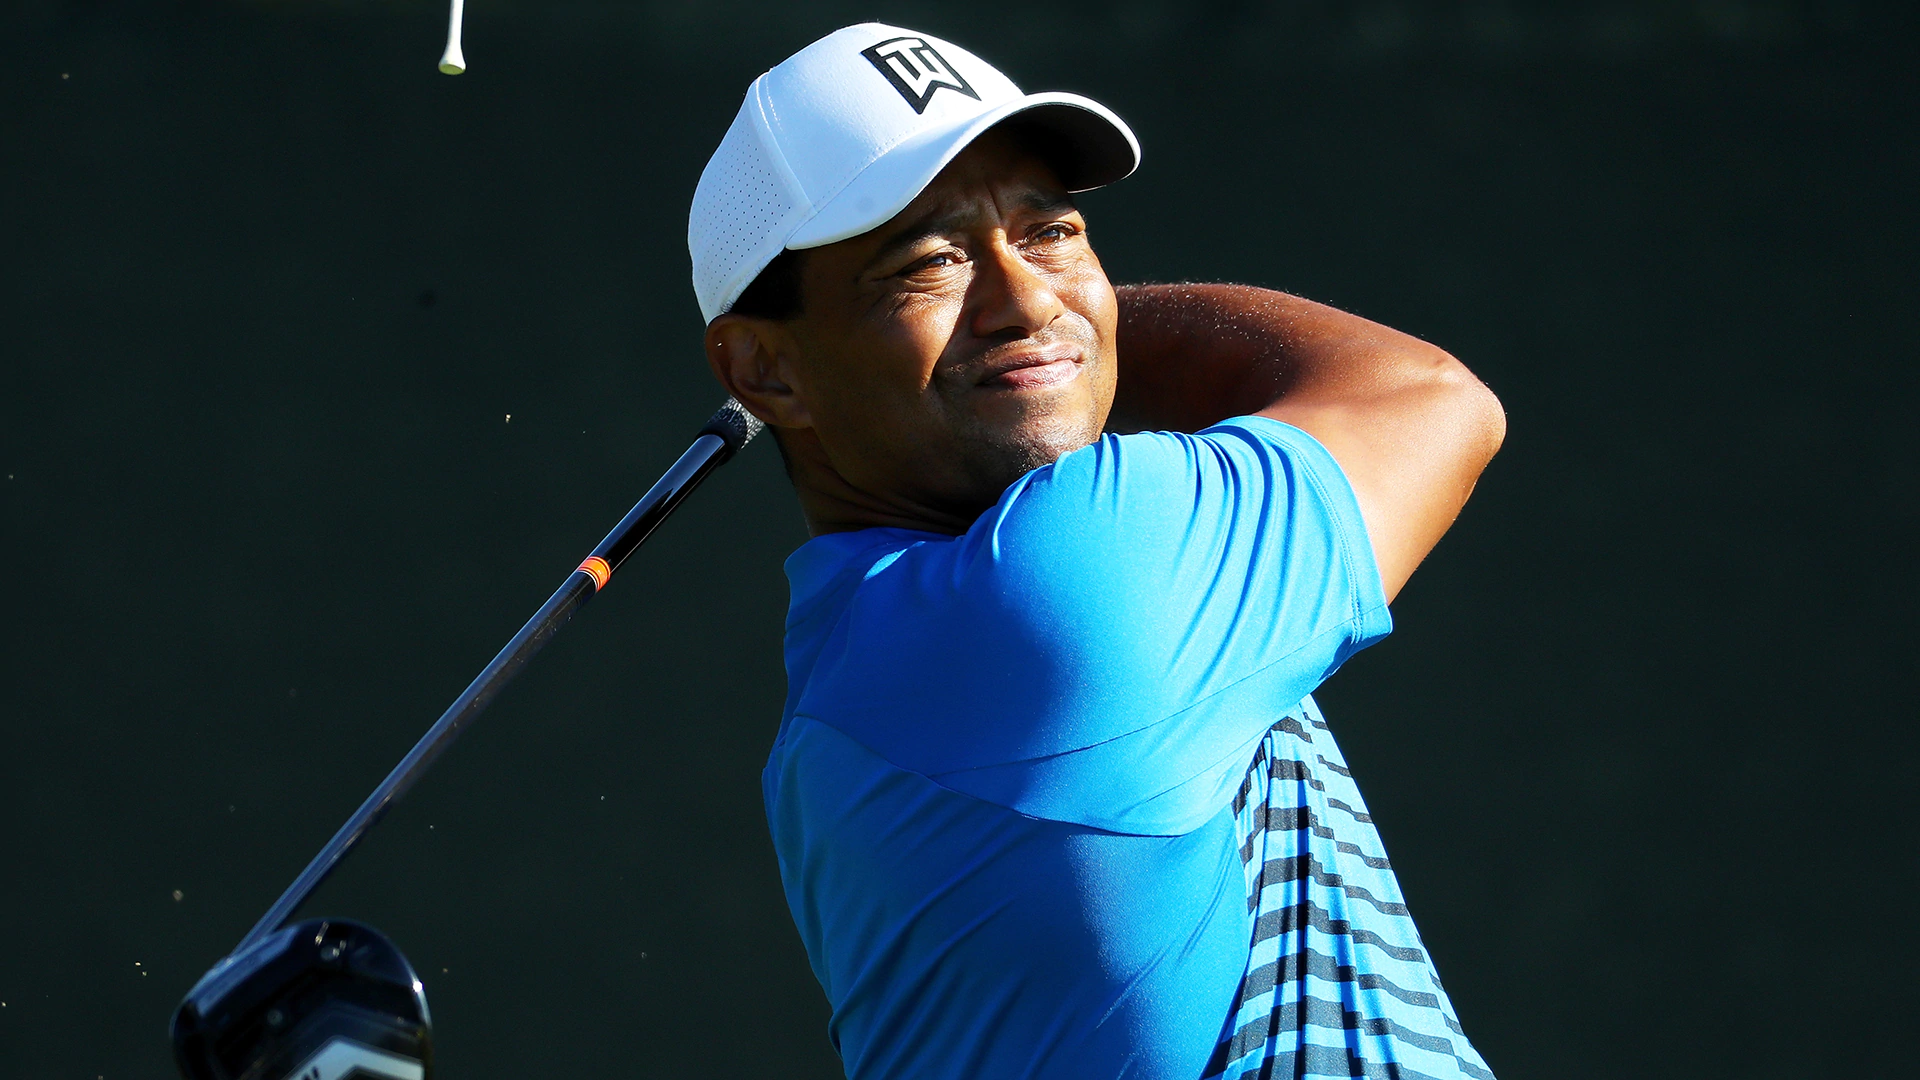 U.S. Open prop bets on Tiger: 20/1 to win; +300 to MC